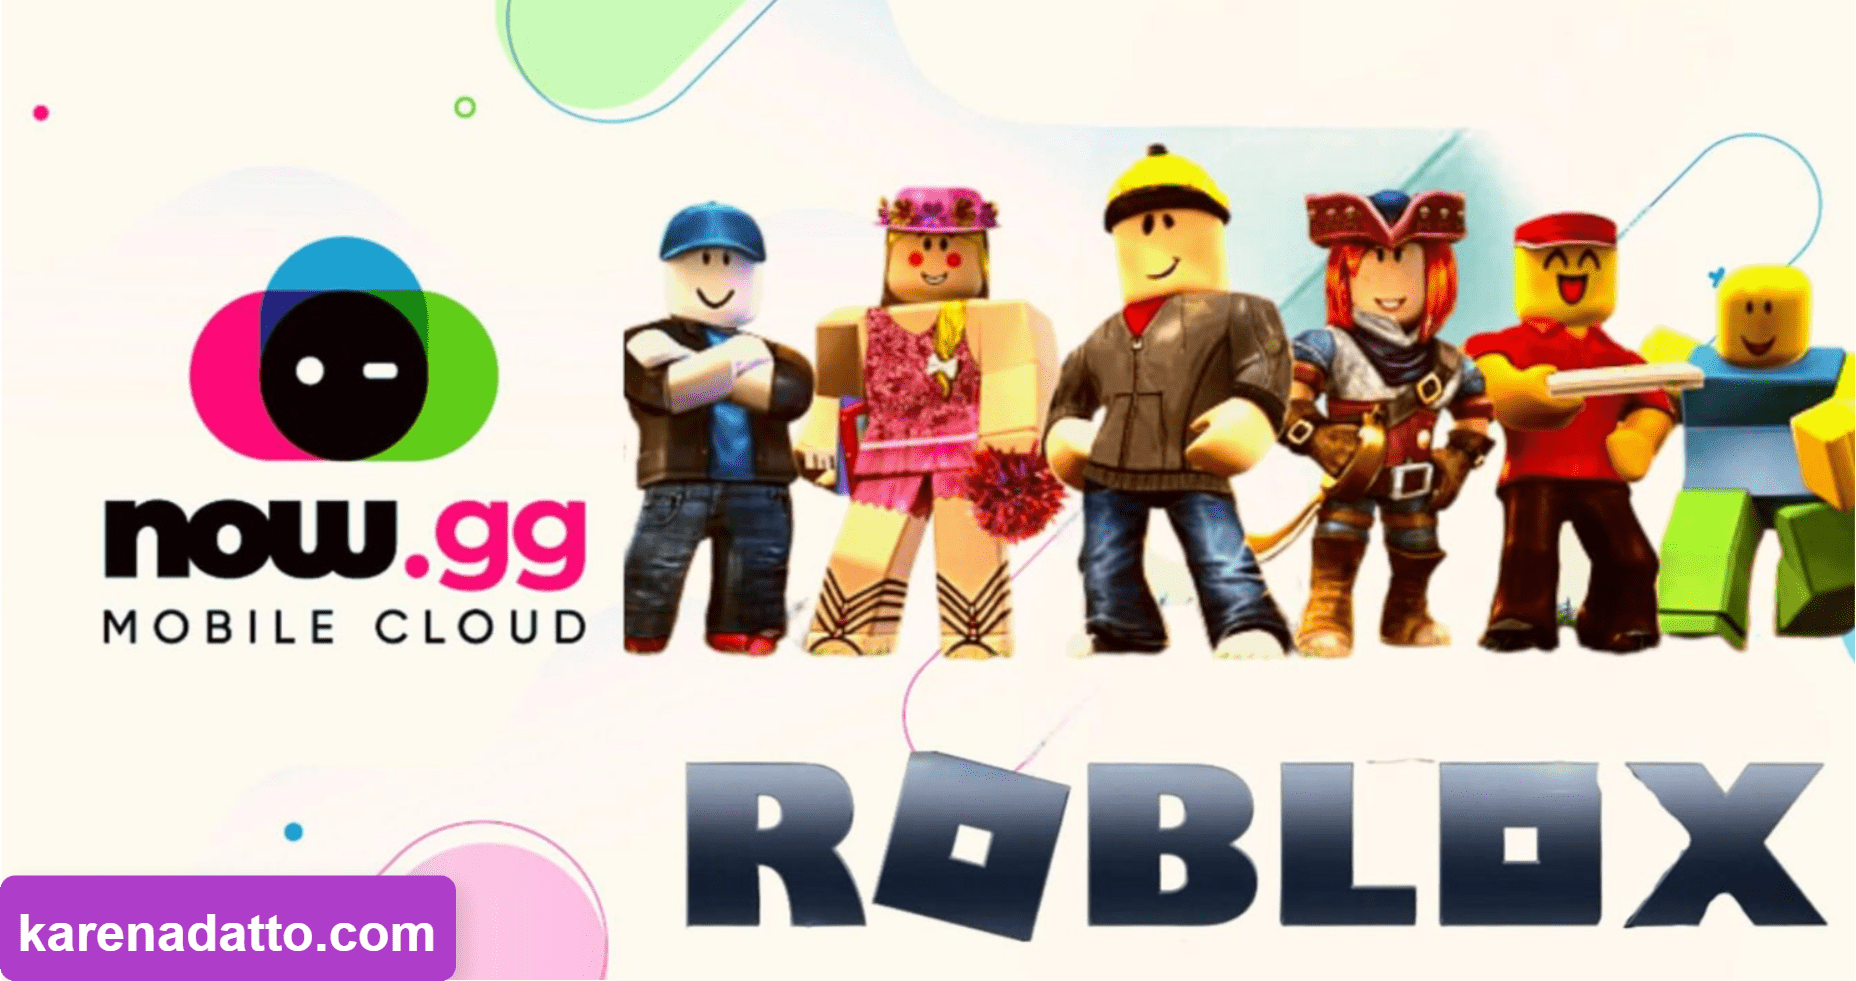 Playing Roblox on now.gg